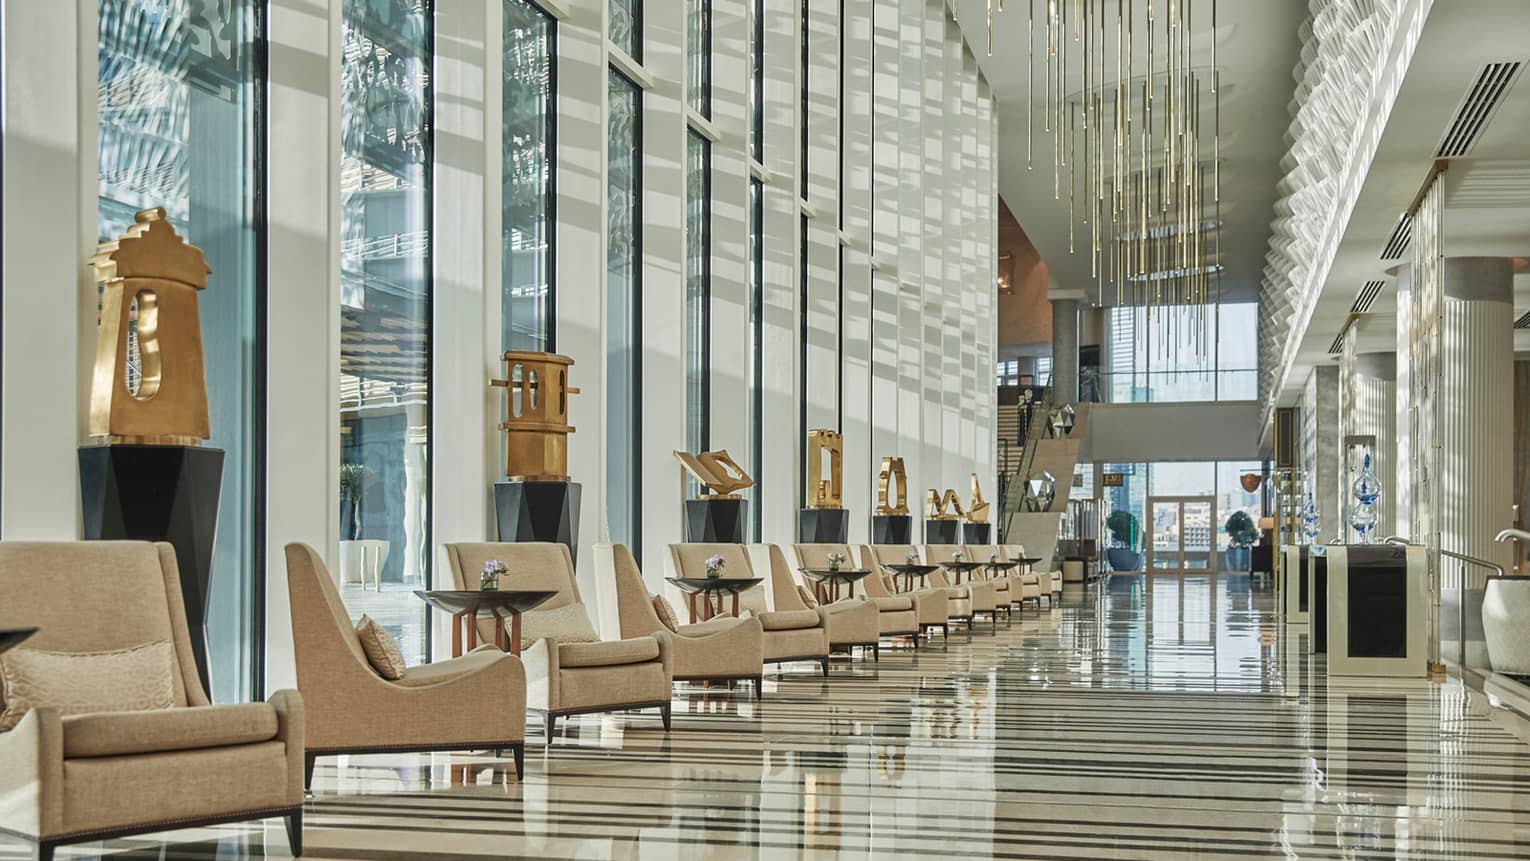 Hotel lobby with row of tan arm chairs, gold sculptures and floor-to-ceiling windows for natural light